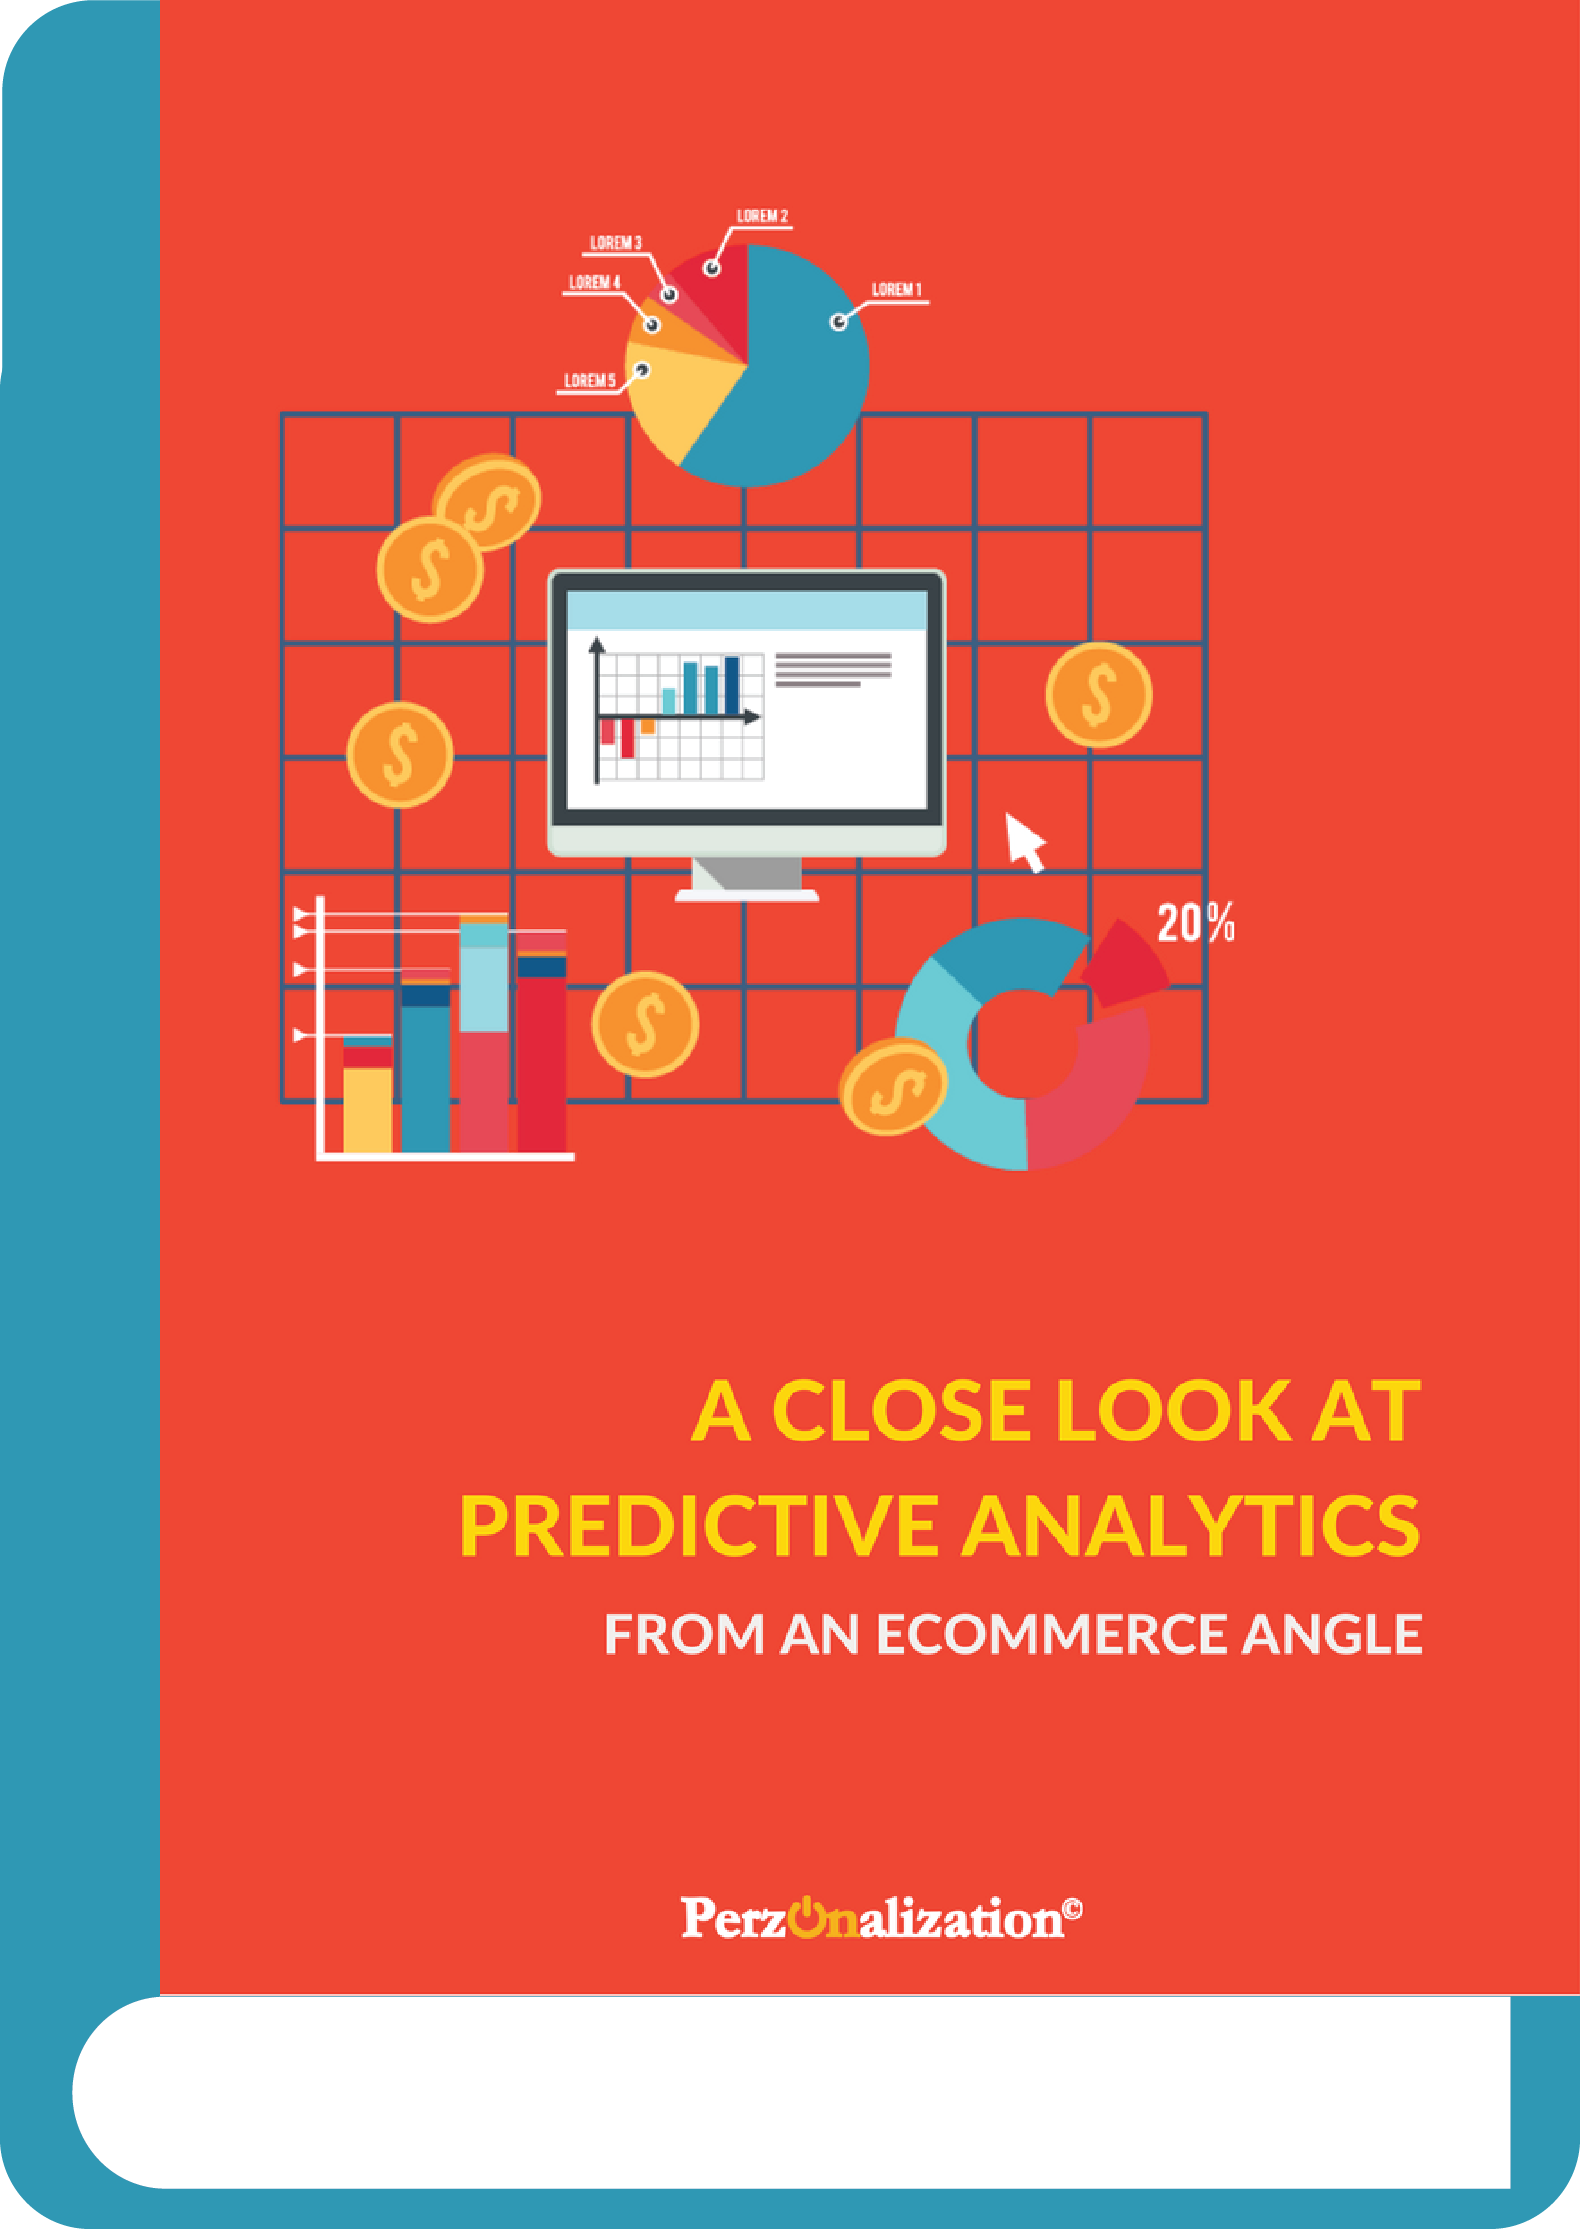 Predictive Analytics is not an enterprise-only solution anymore. SMB eCommerce owners can now analyse data and understand the usage patterns with SaaS apps.